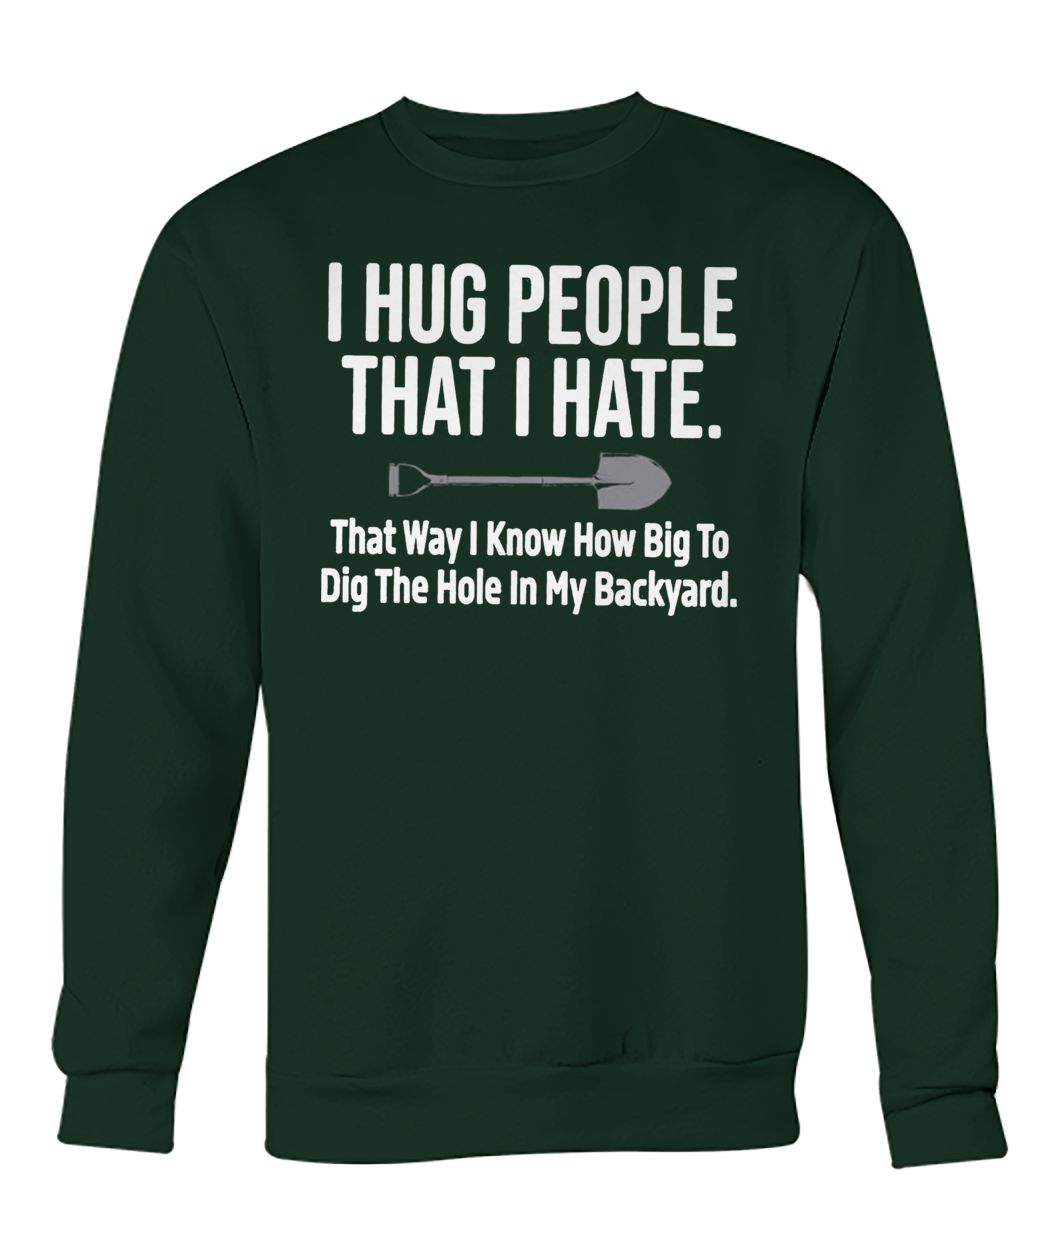 I hug people that I hate that way I know how big to dig the hole in my backyard crew neck sweatshirt